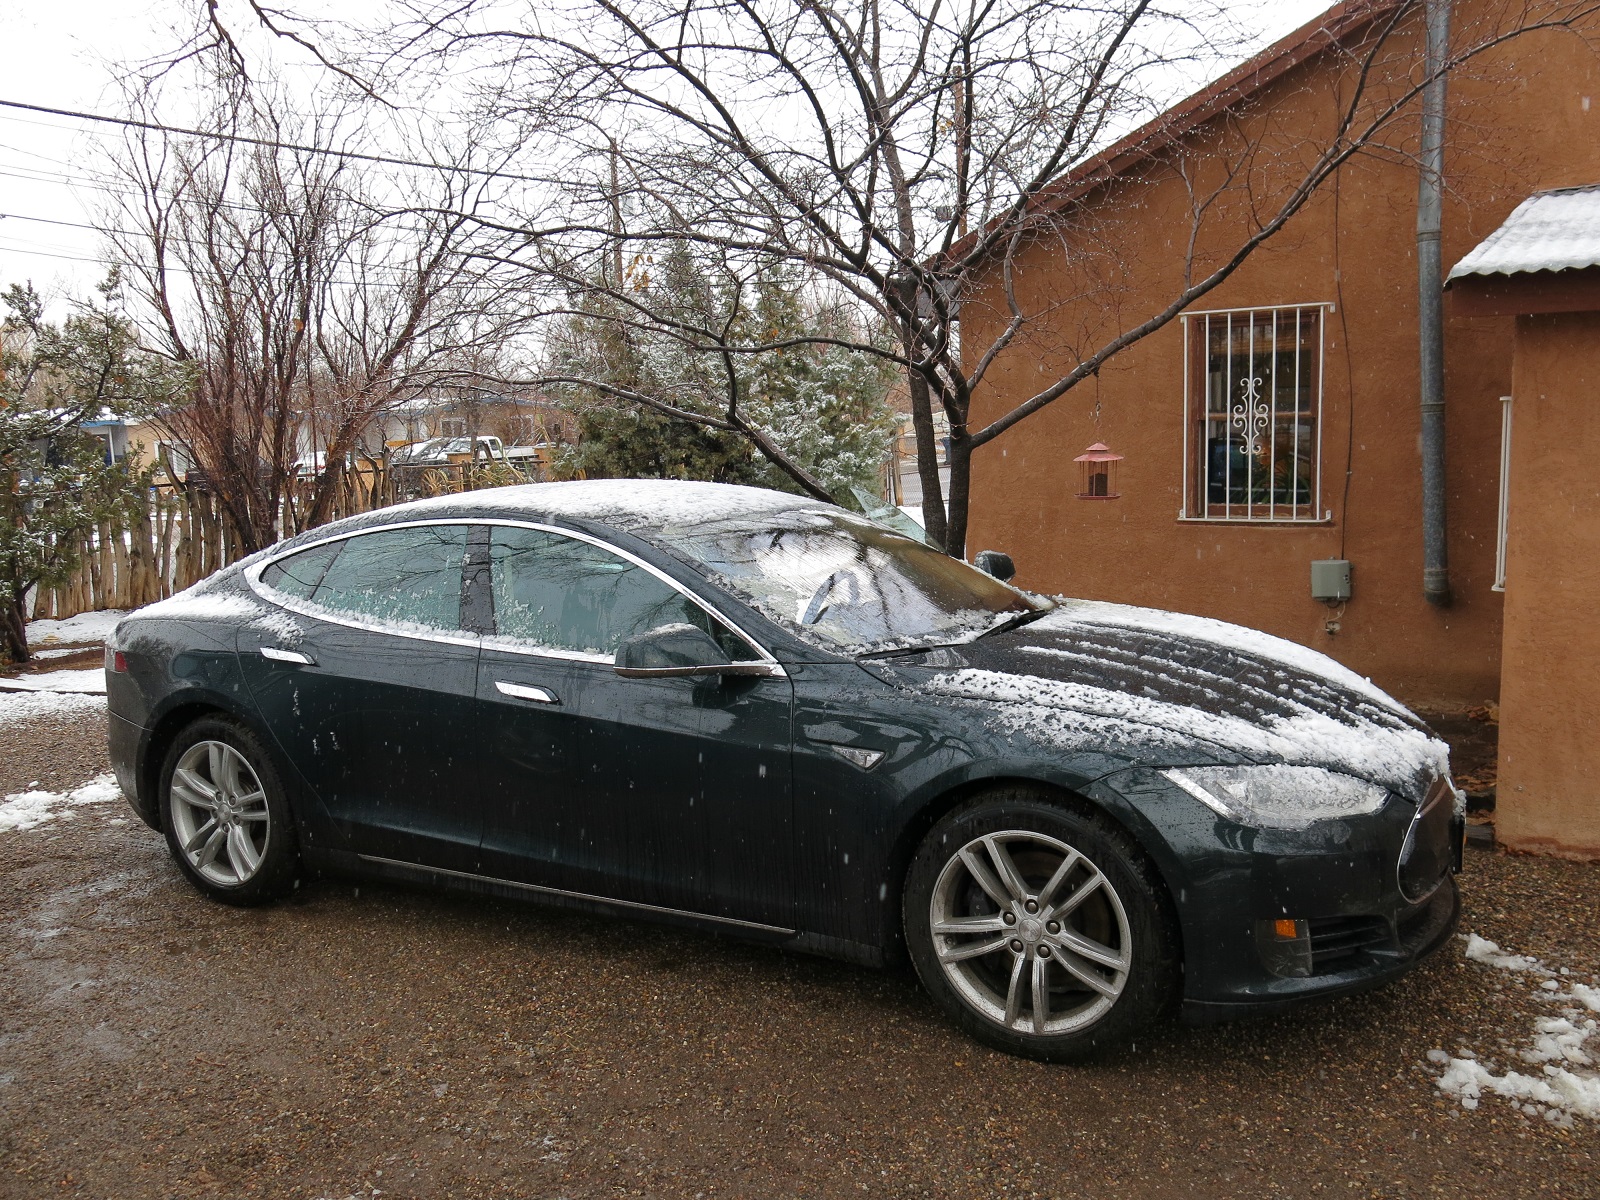 How to Decide if Purchasing a Tesla Extended Warranty Is Right for You